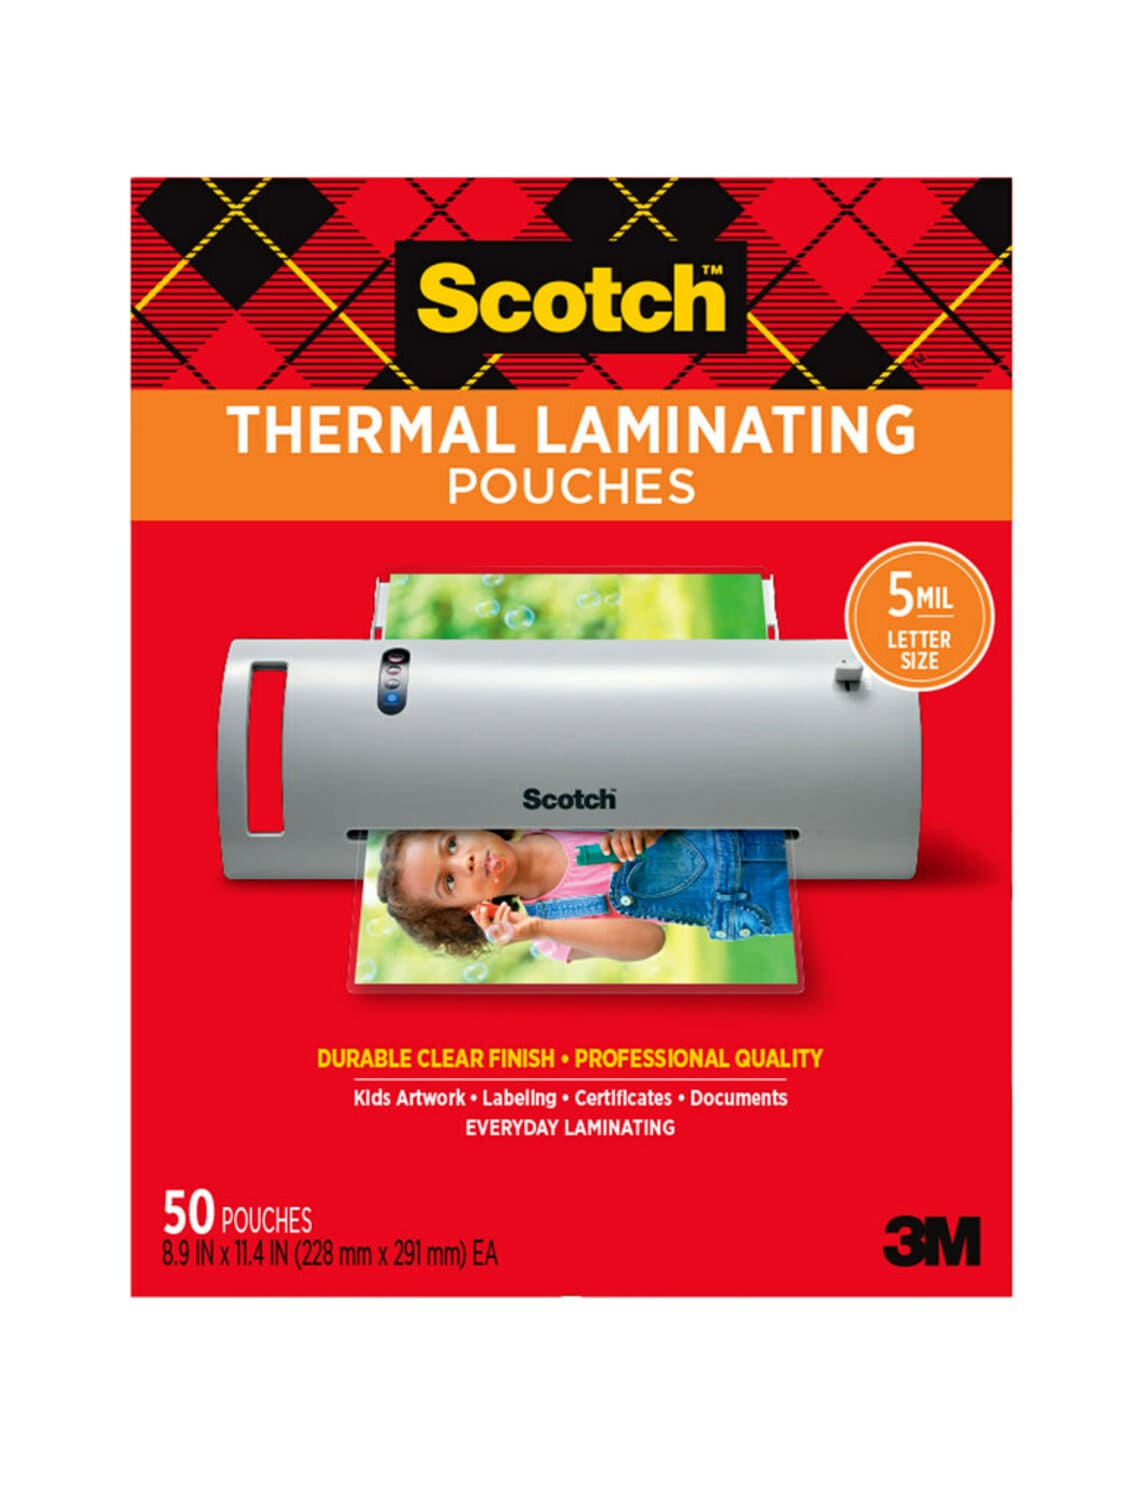 7100232581 - Scotch Thermal Pouches 5 mil TP5854-50, 8.9 in x 11.4 in (228 mm x 291 mm)